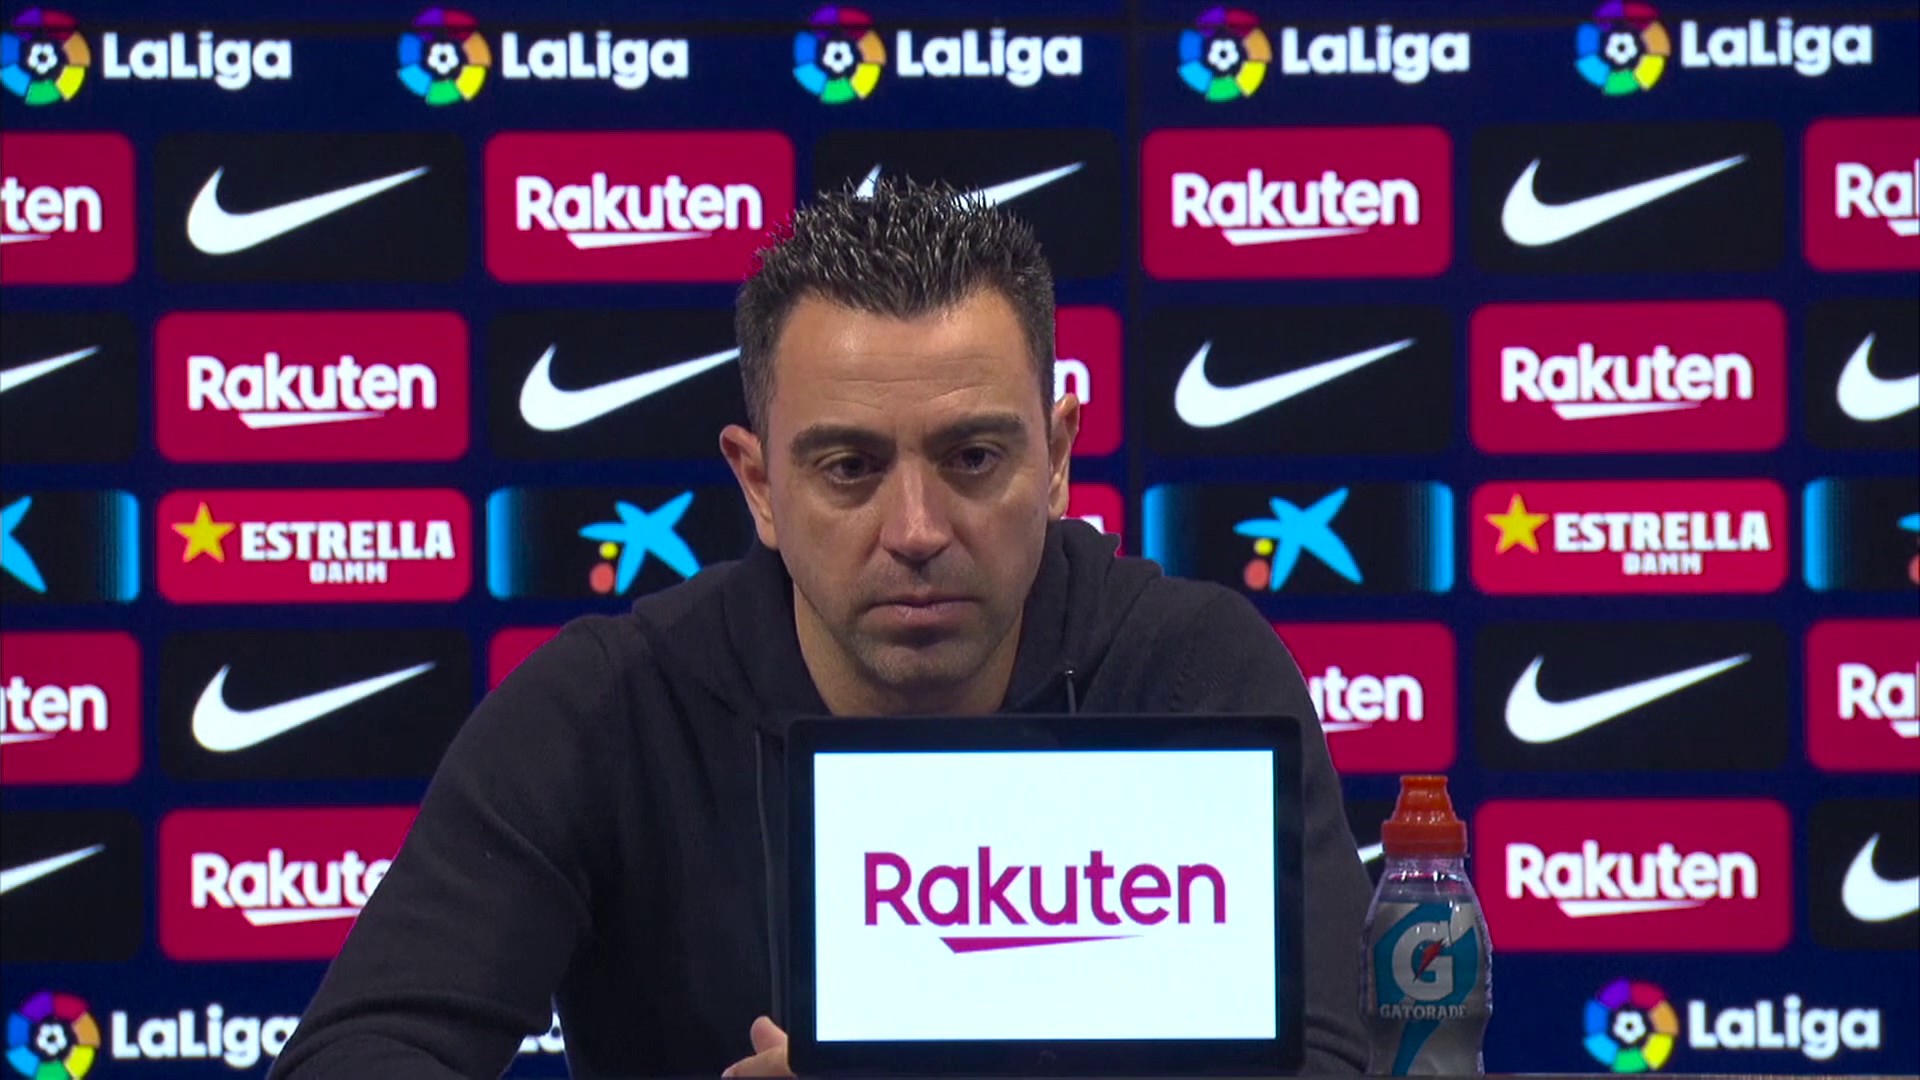 'We gave it away, but I'm proud of the team' - Xavi on Barcelona's defeat to Betis